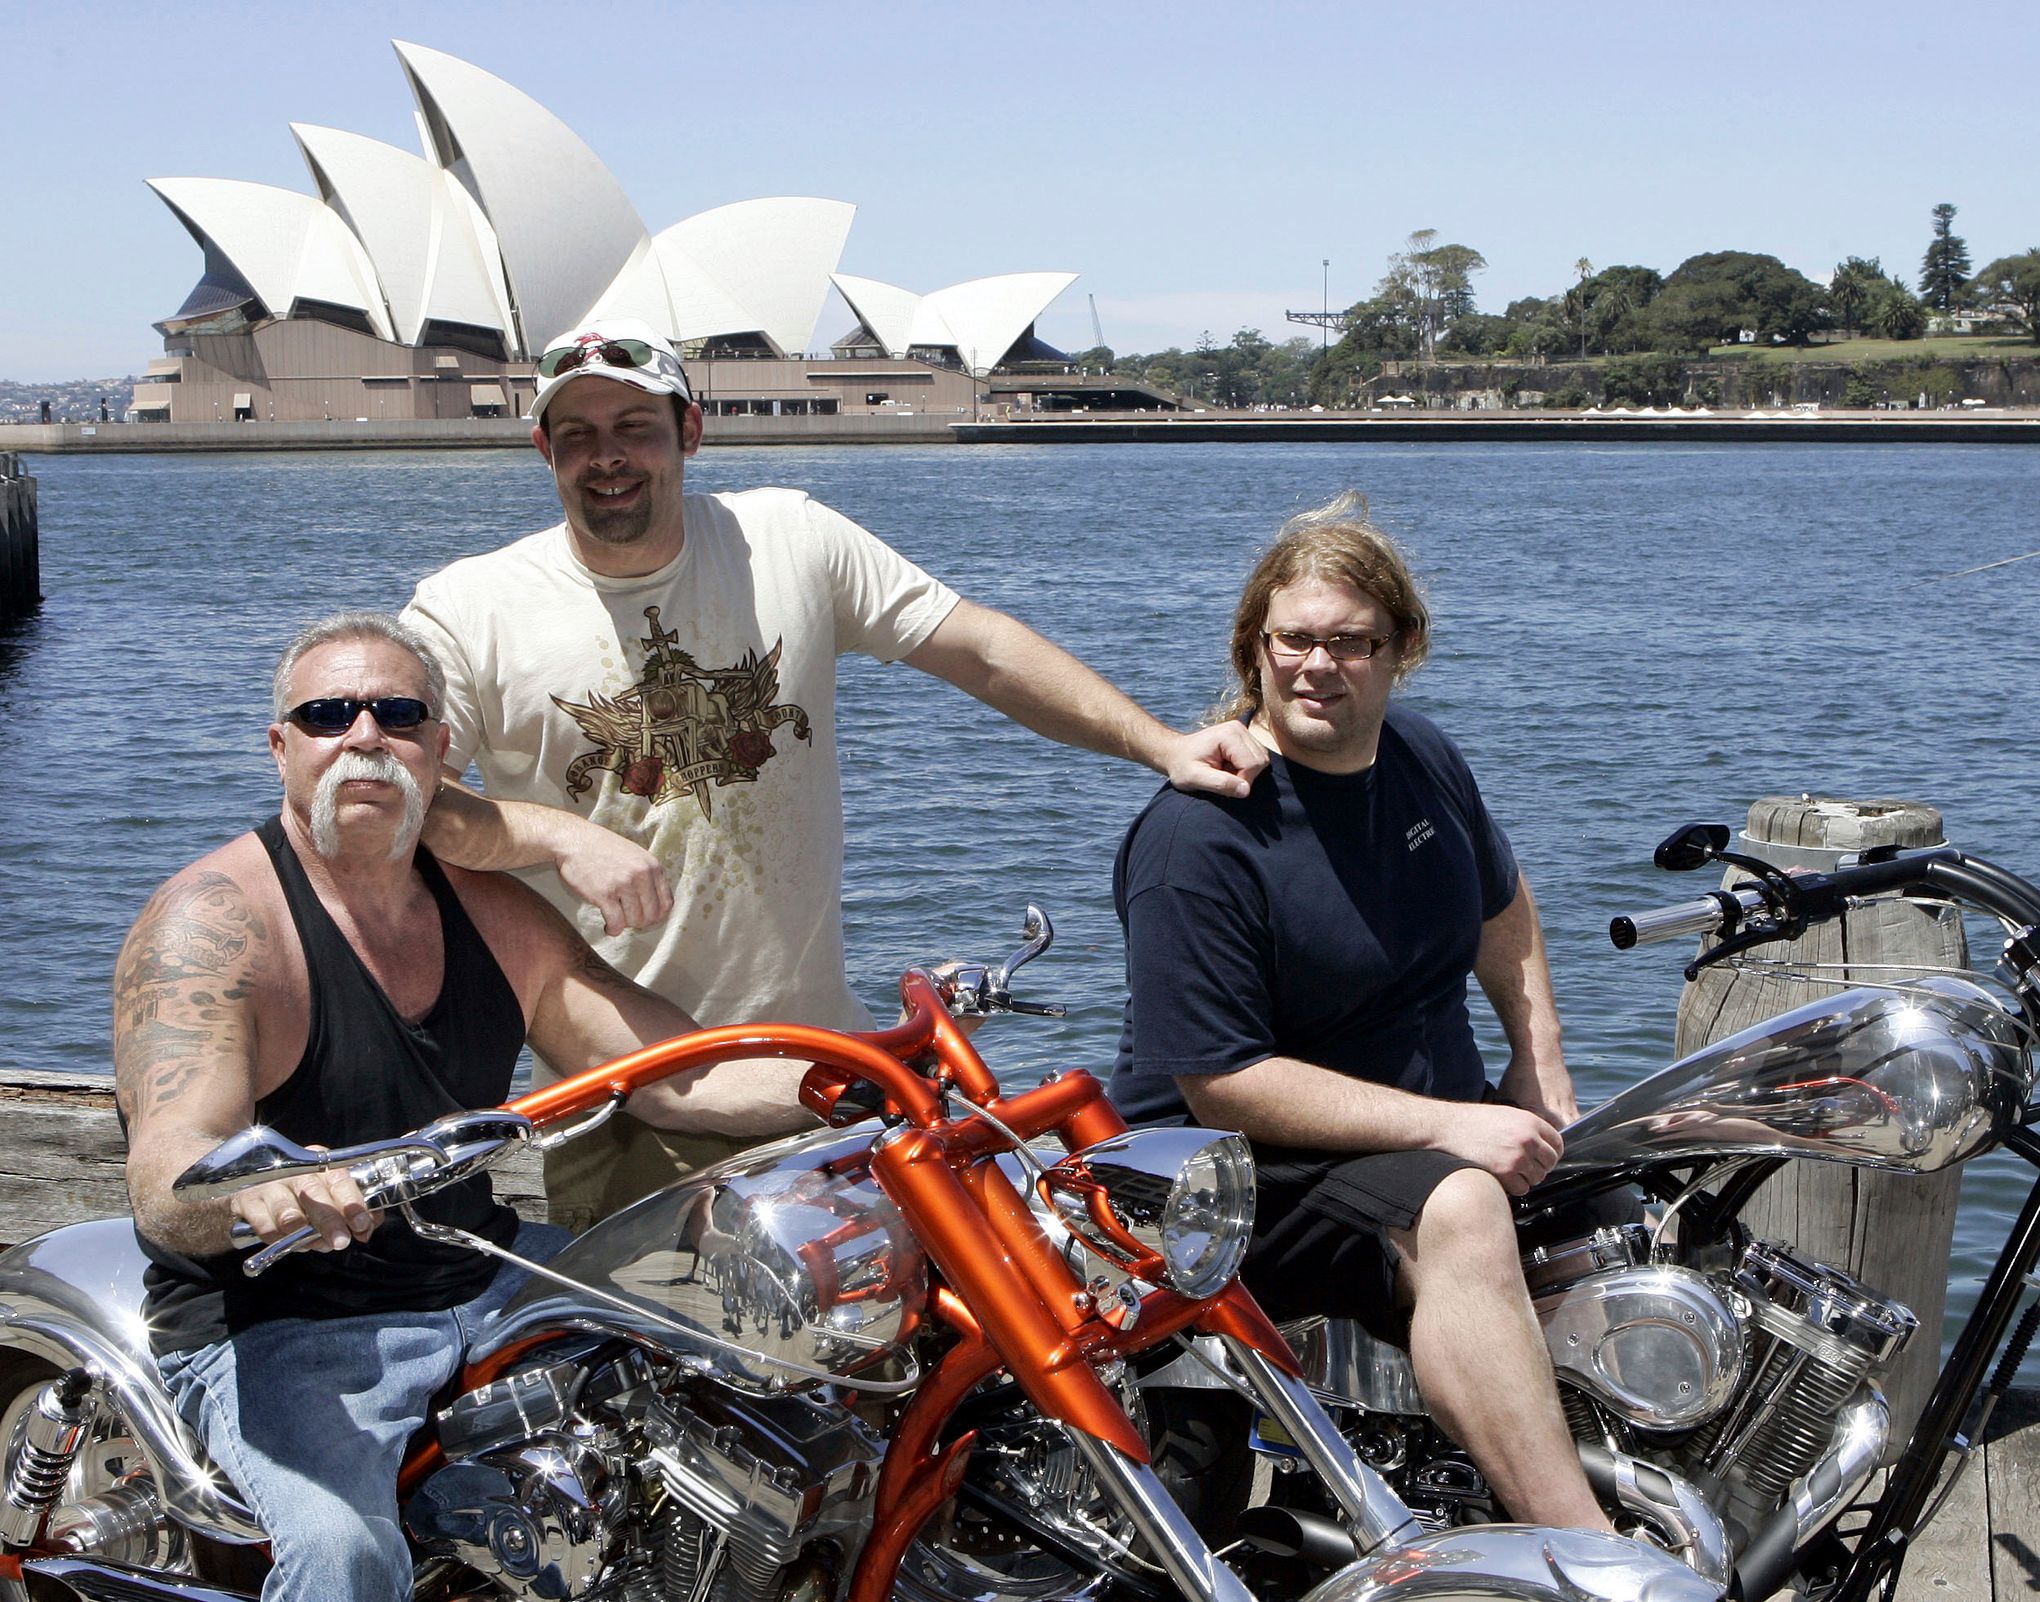 Discovery Channel revives 'American Chopper' after 5 years